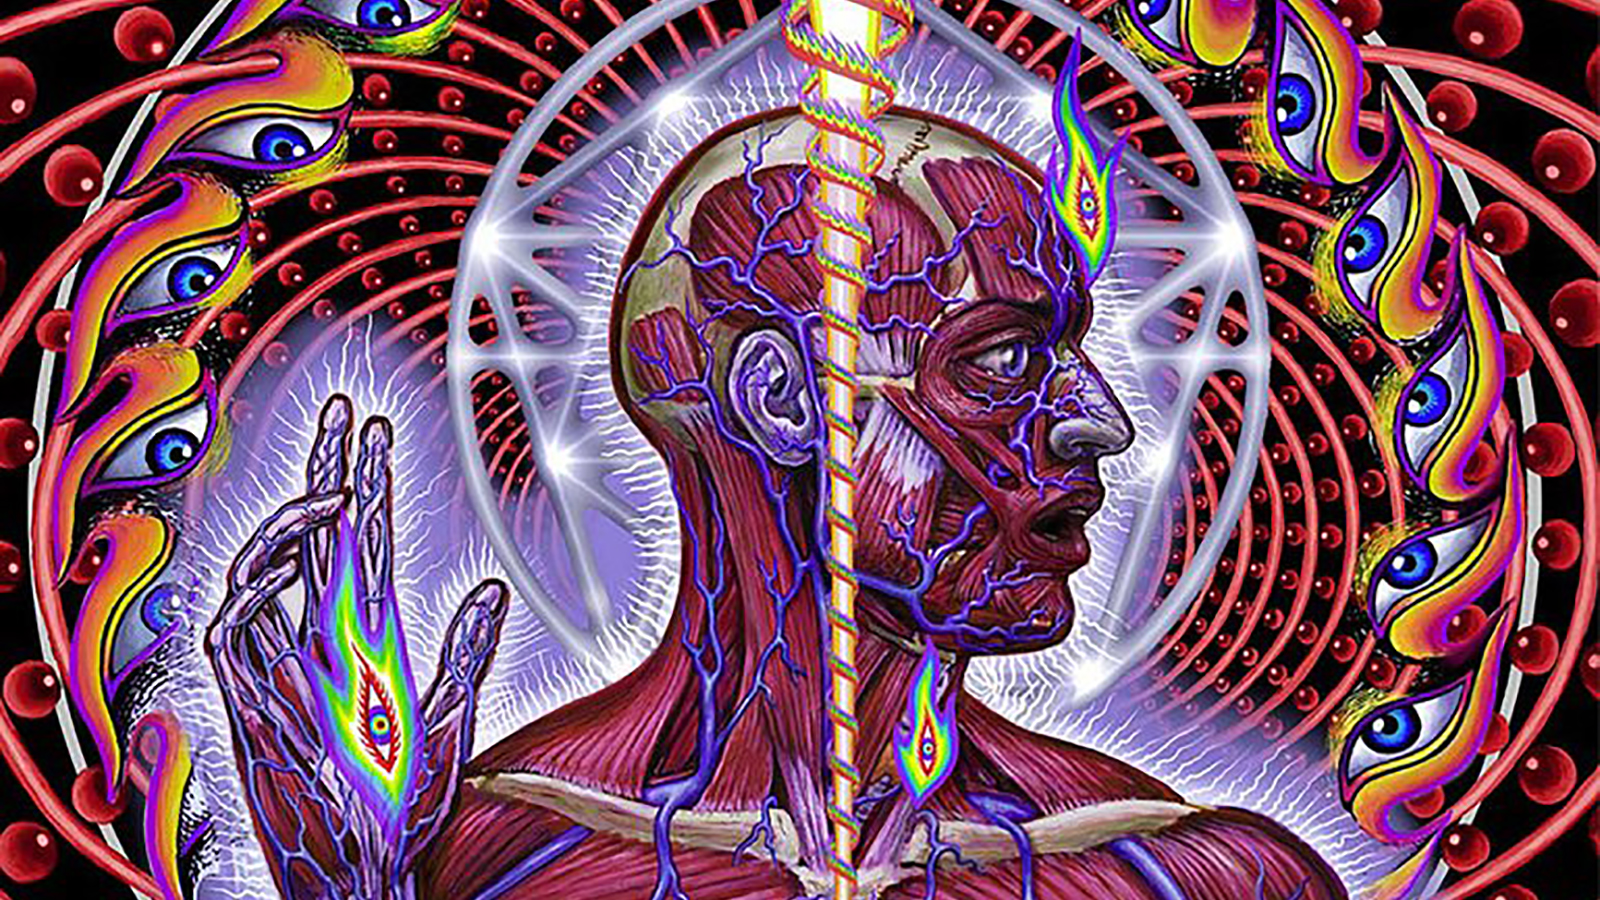 10 Things You Didn't Know About Tool's 'Lateralus